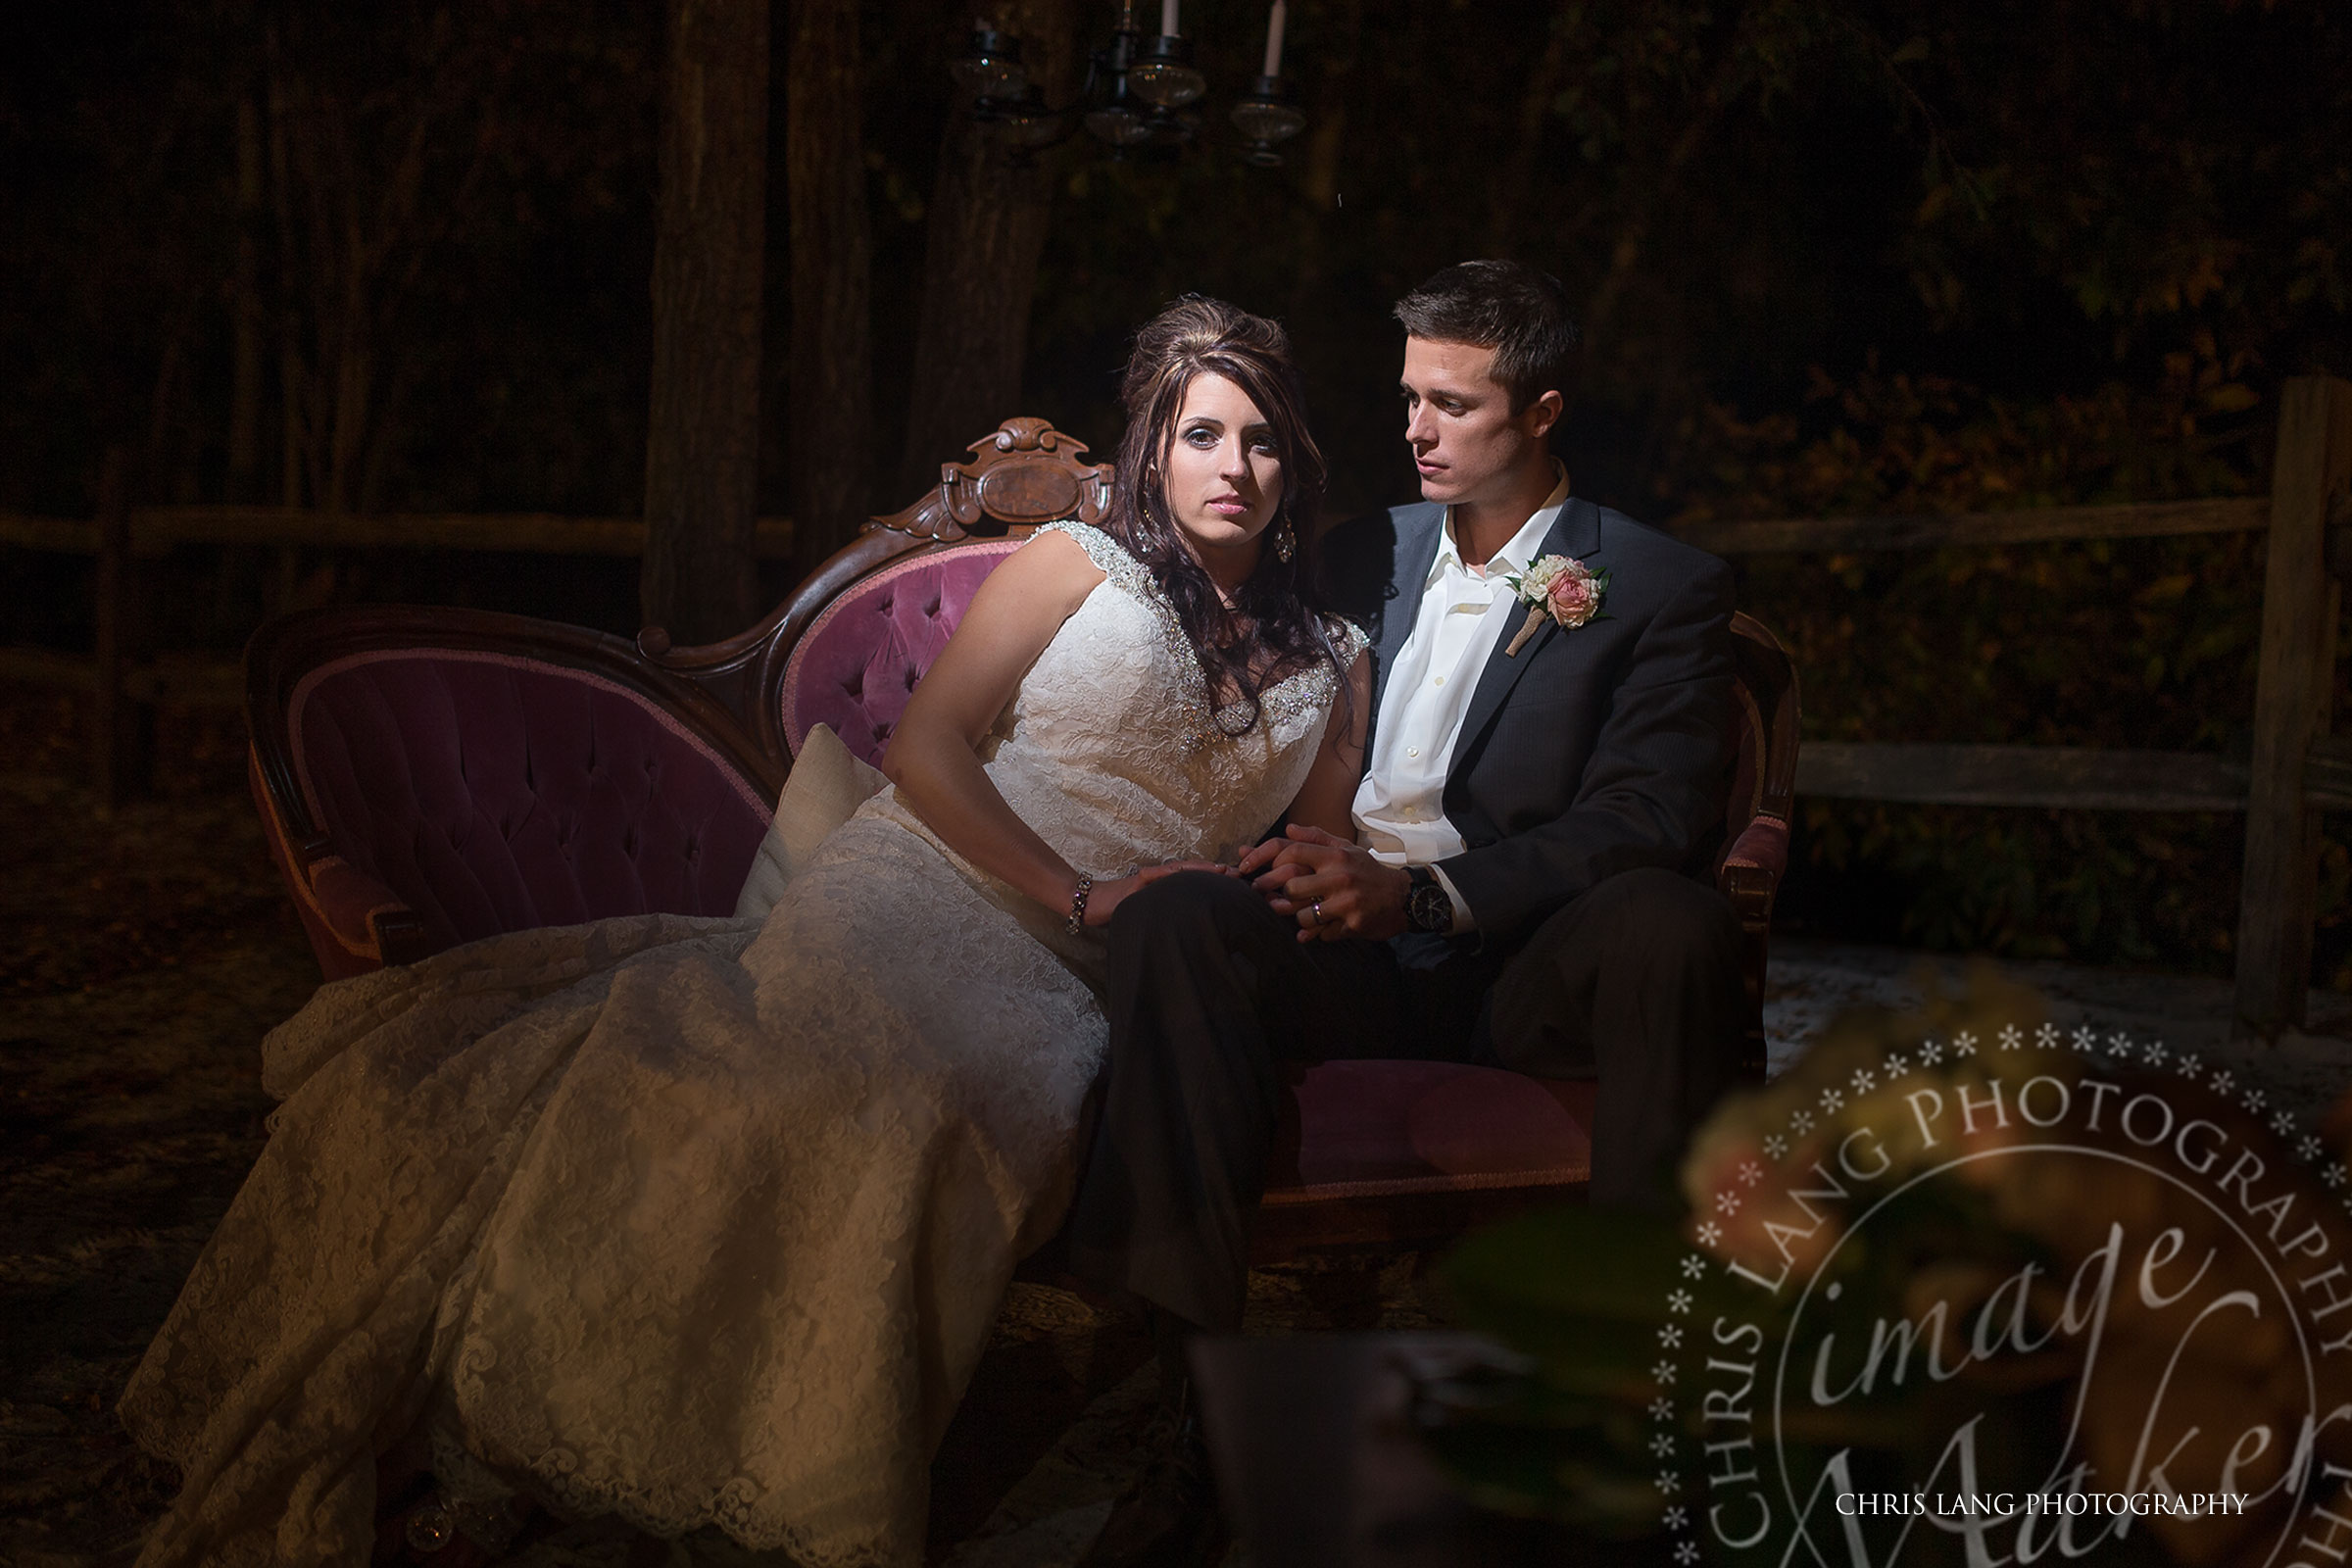 Romantic-Nigh ttime-Wedding-Picture-of-Bride-Groom-Sitting-on-a-Couch-at-River-Landing-River-Lodge-Wedding Picture Ideas